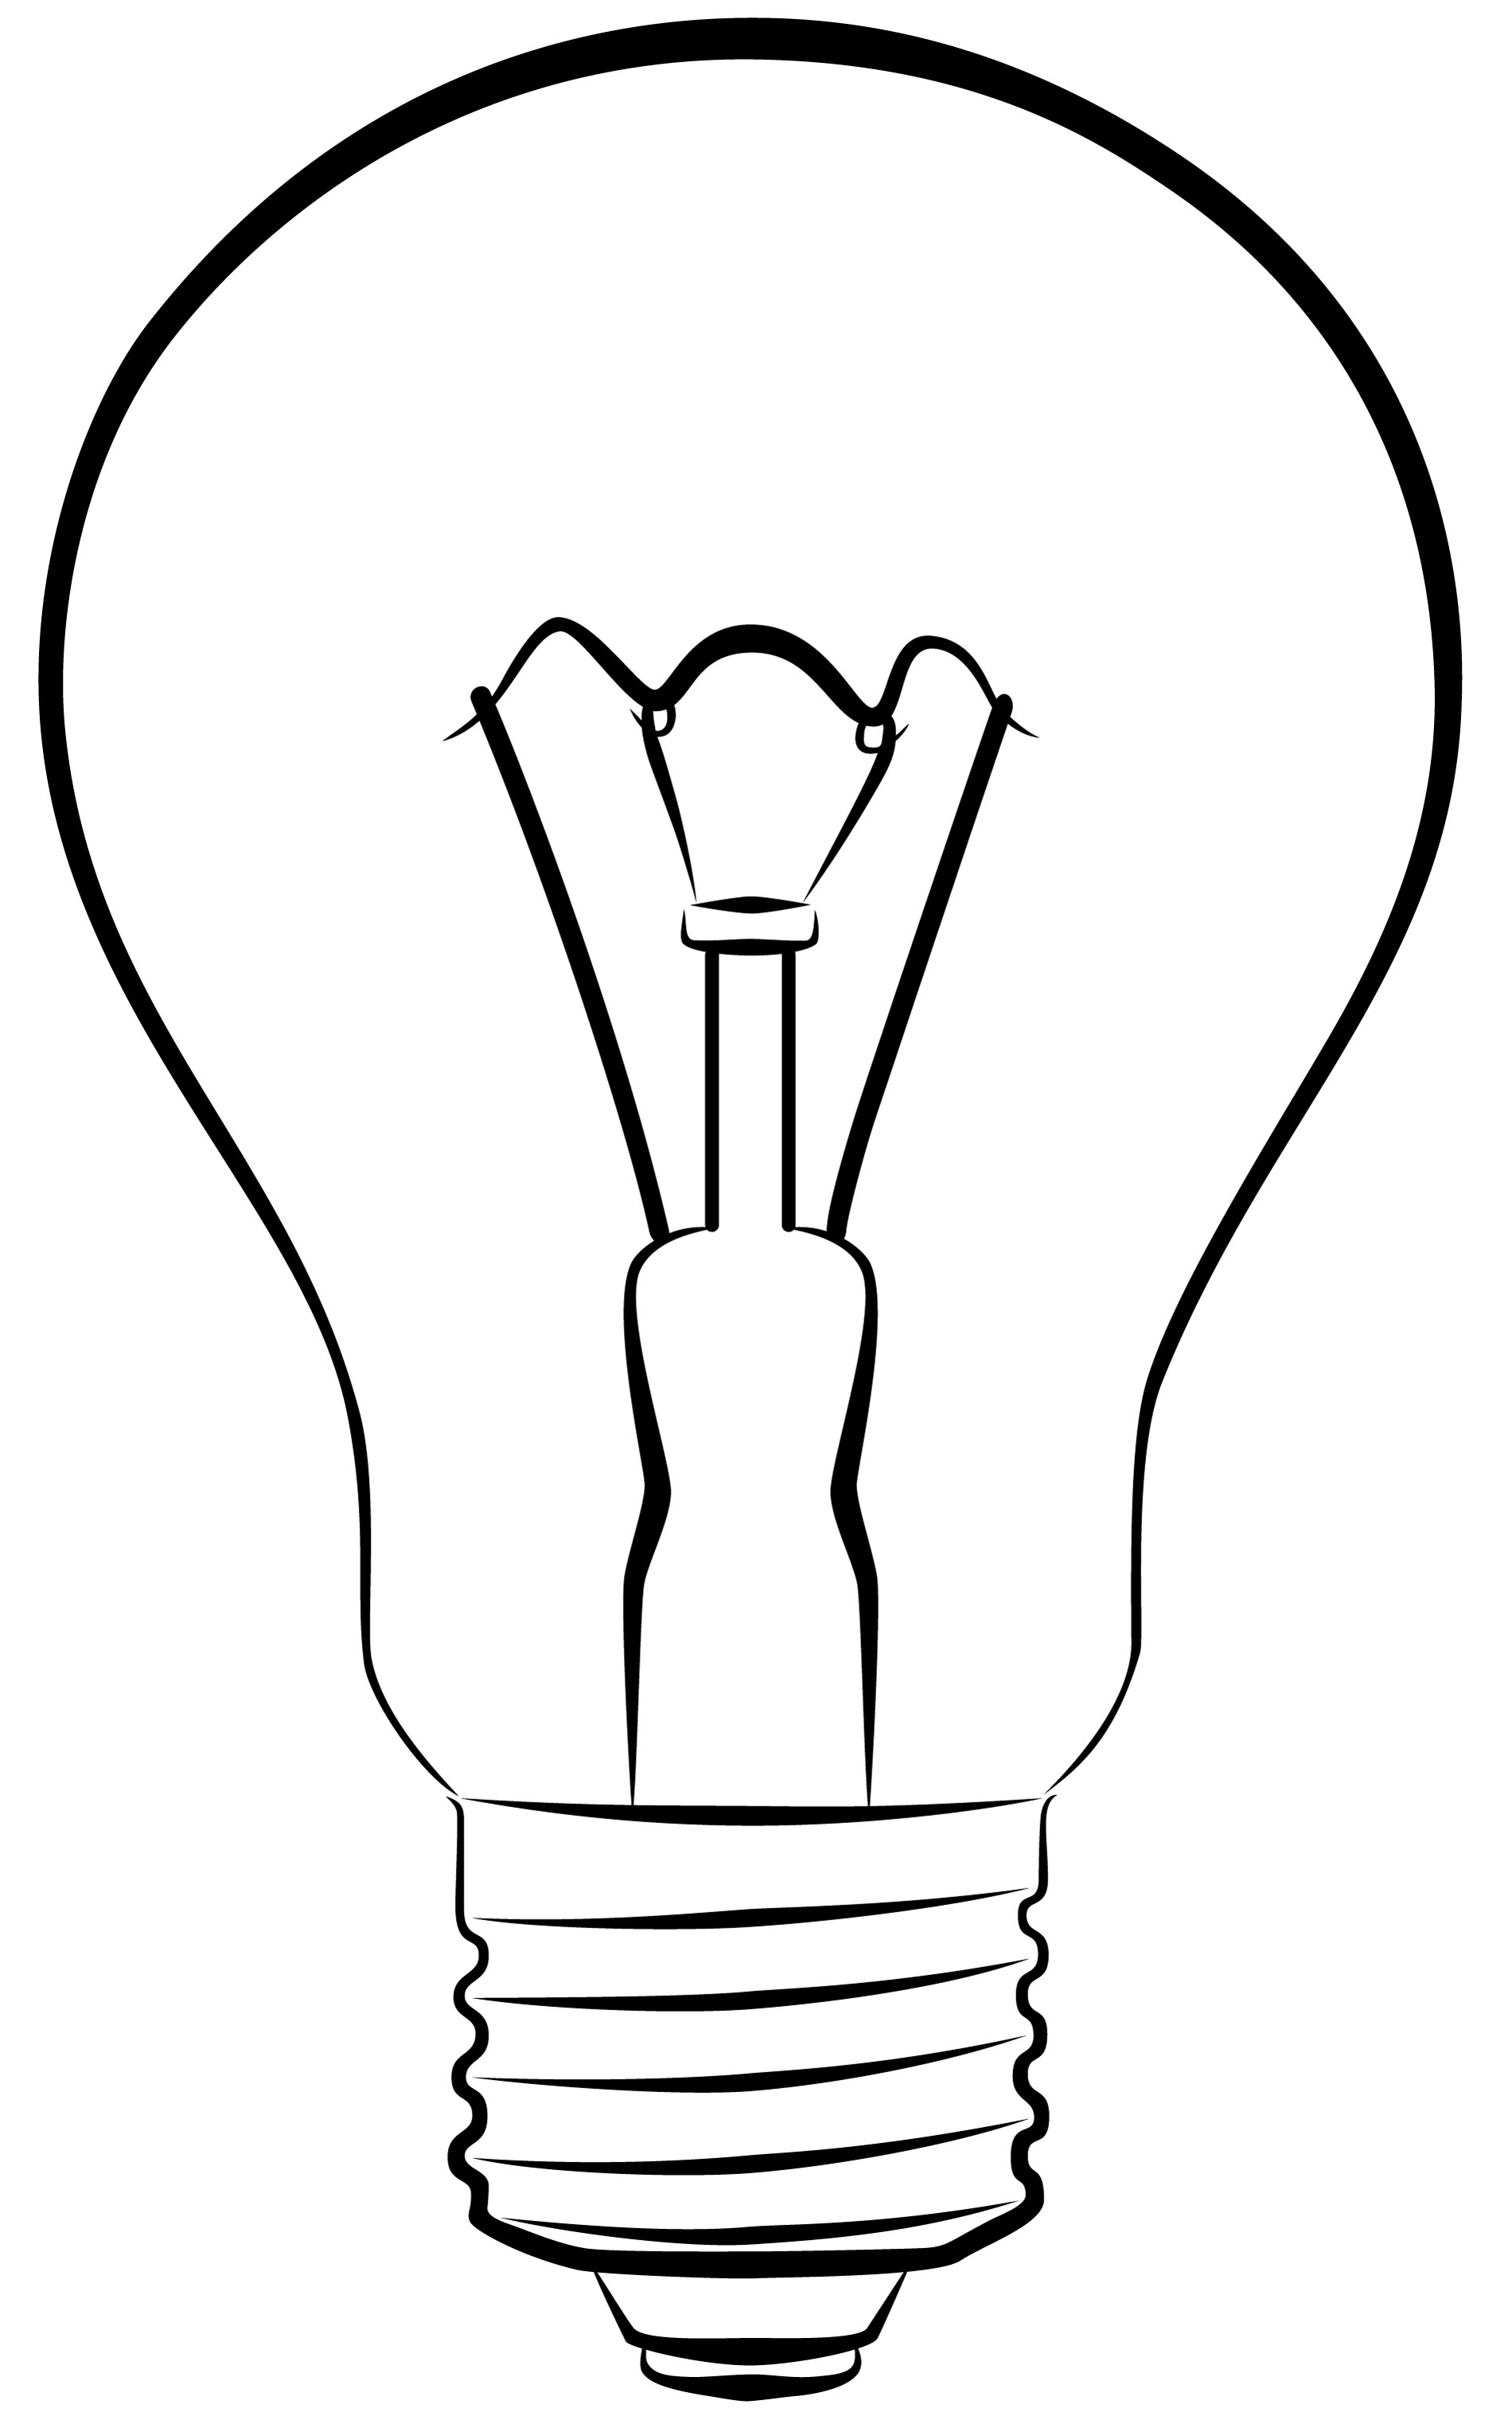 Stop light bulb thinking in weight loss plan!